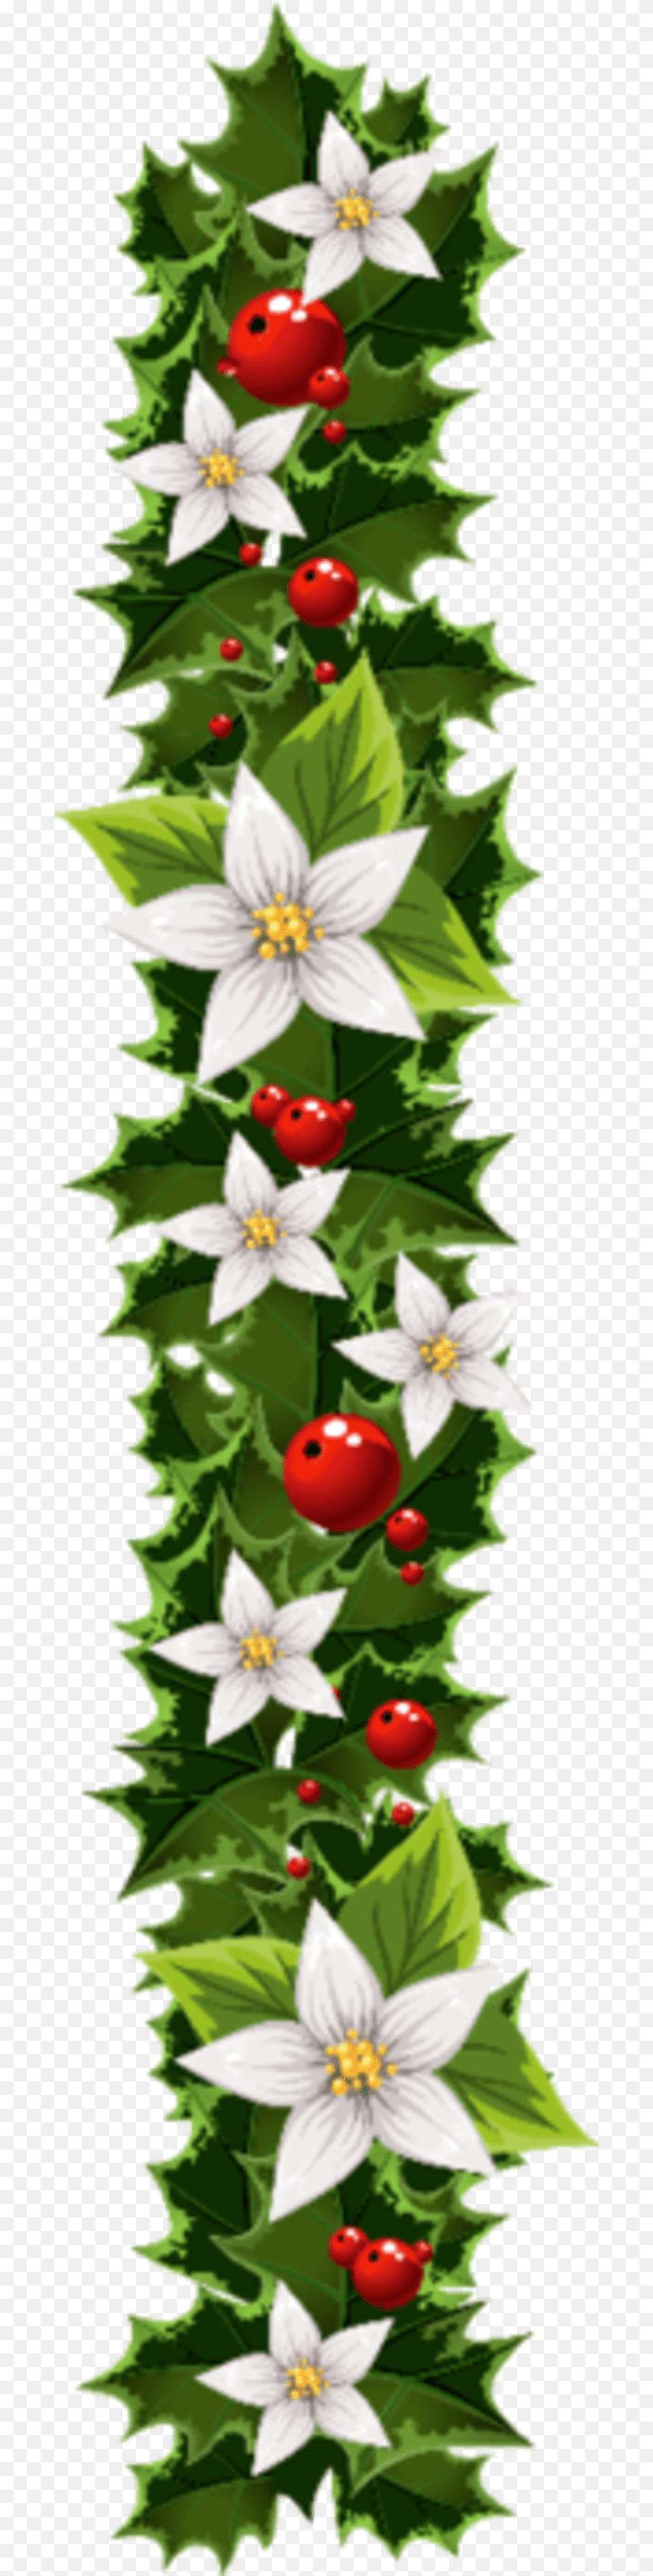 Christmas Garland Clipart Transparent Christmas Garland Clipart, Plant, Tree, Christmas Decorations, Festival Free Png Download